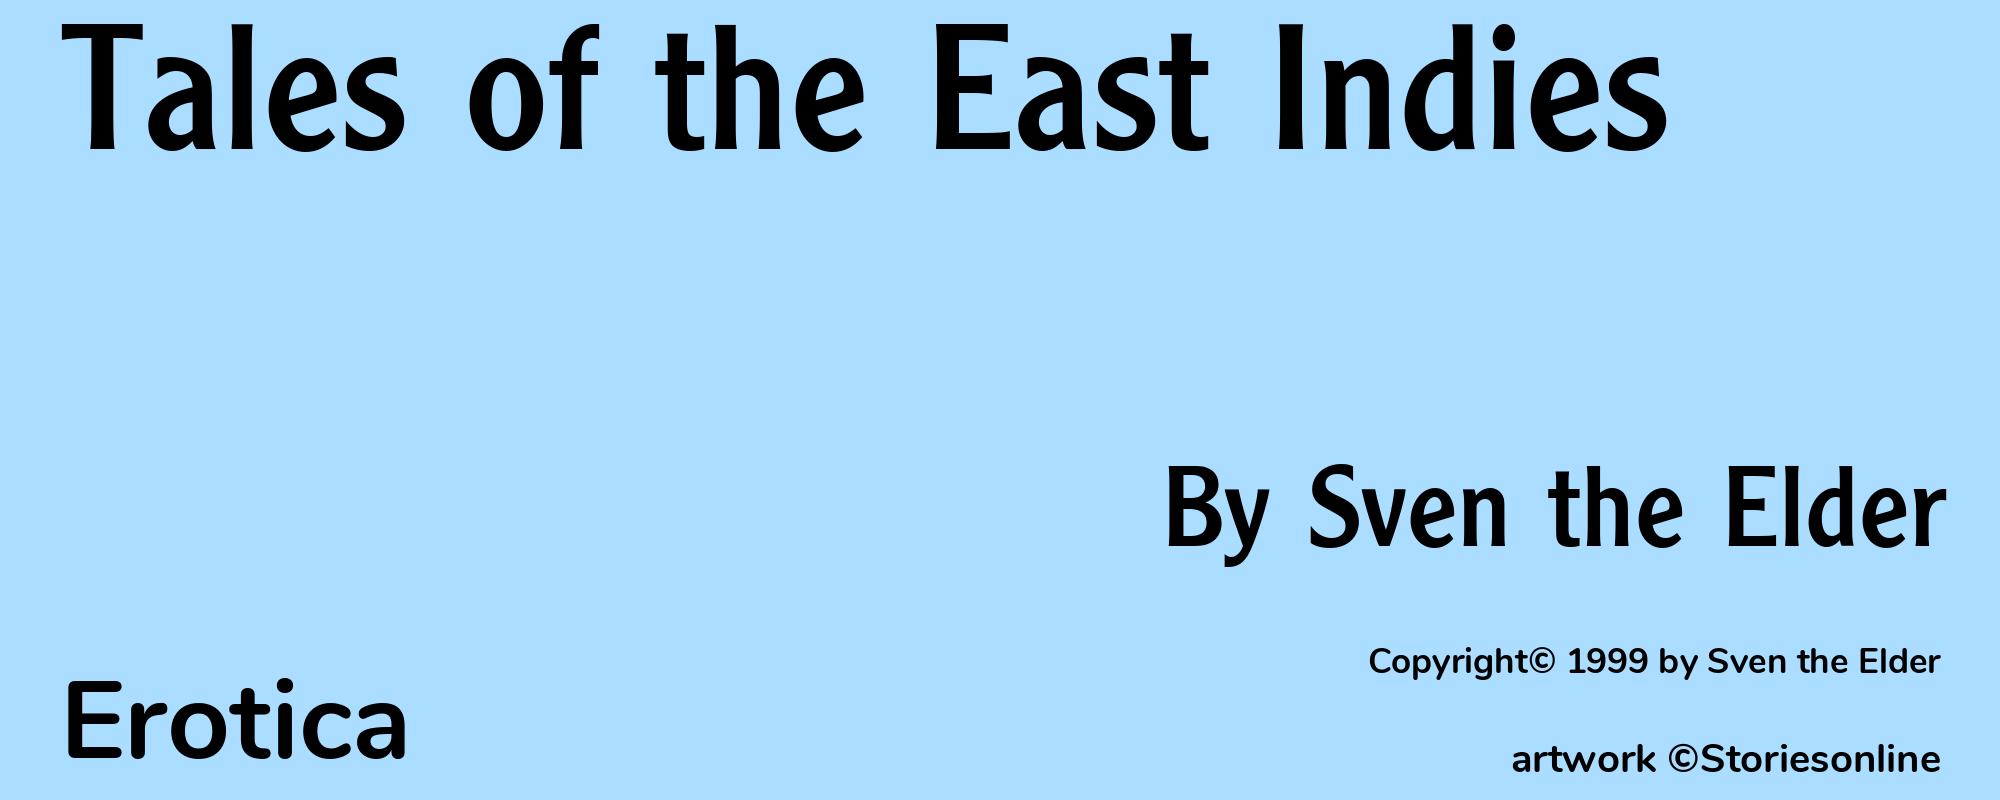 Tales of the East Indies - Cover